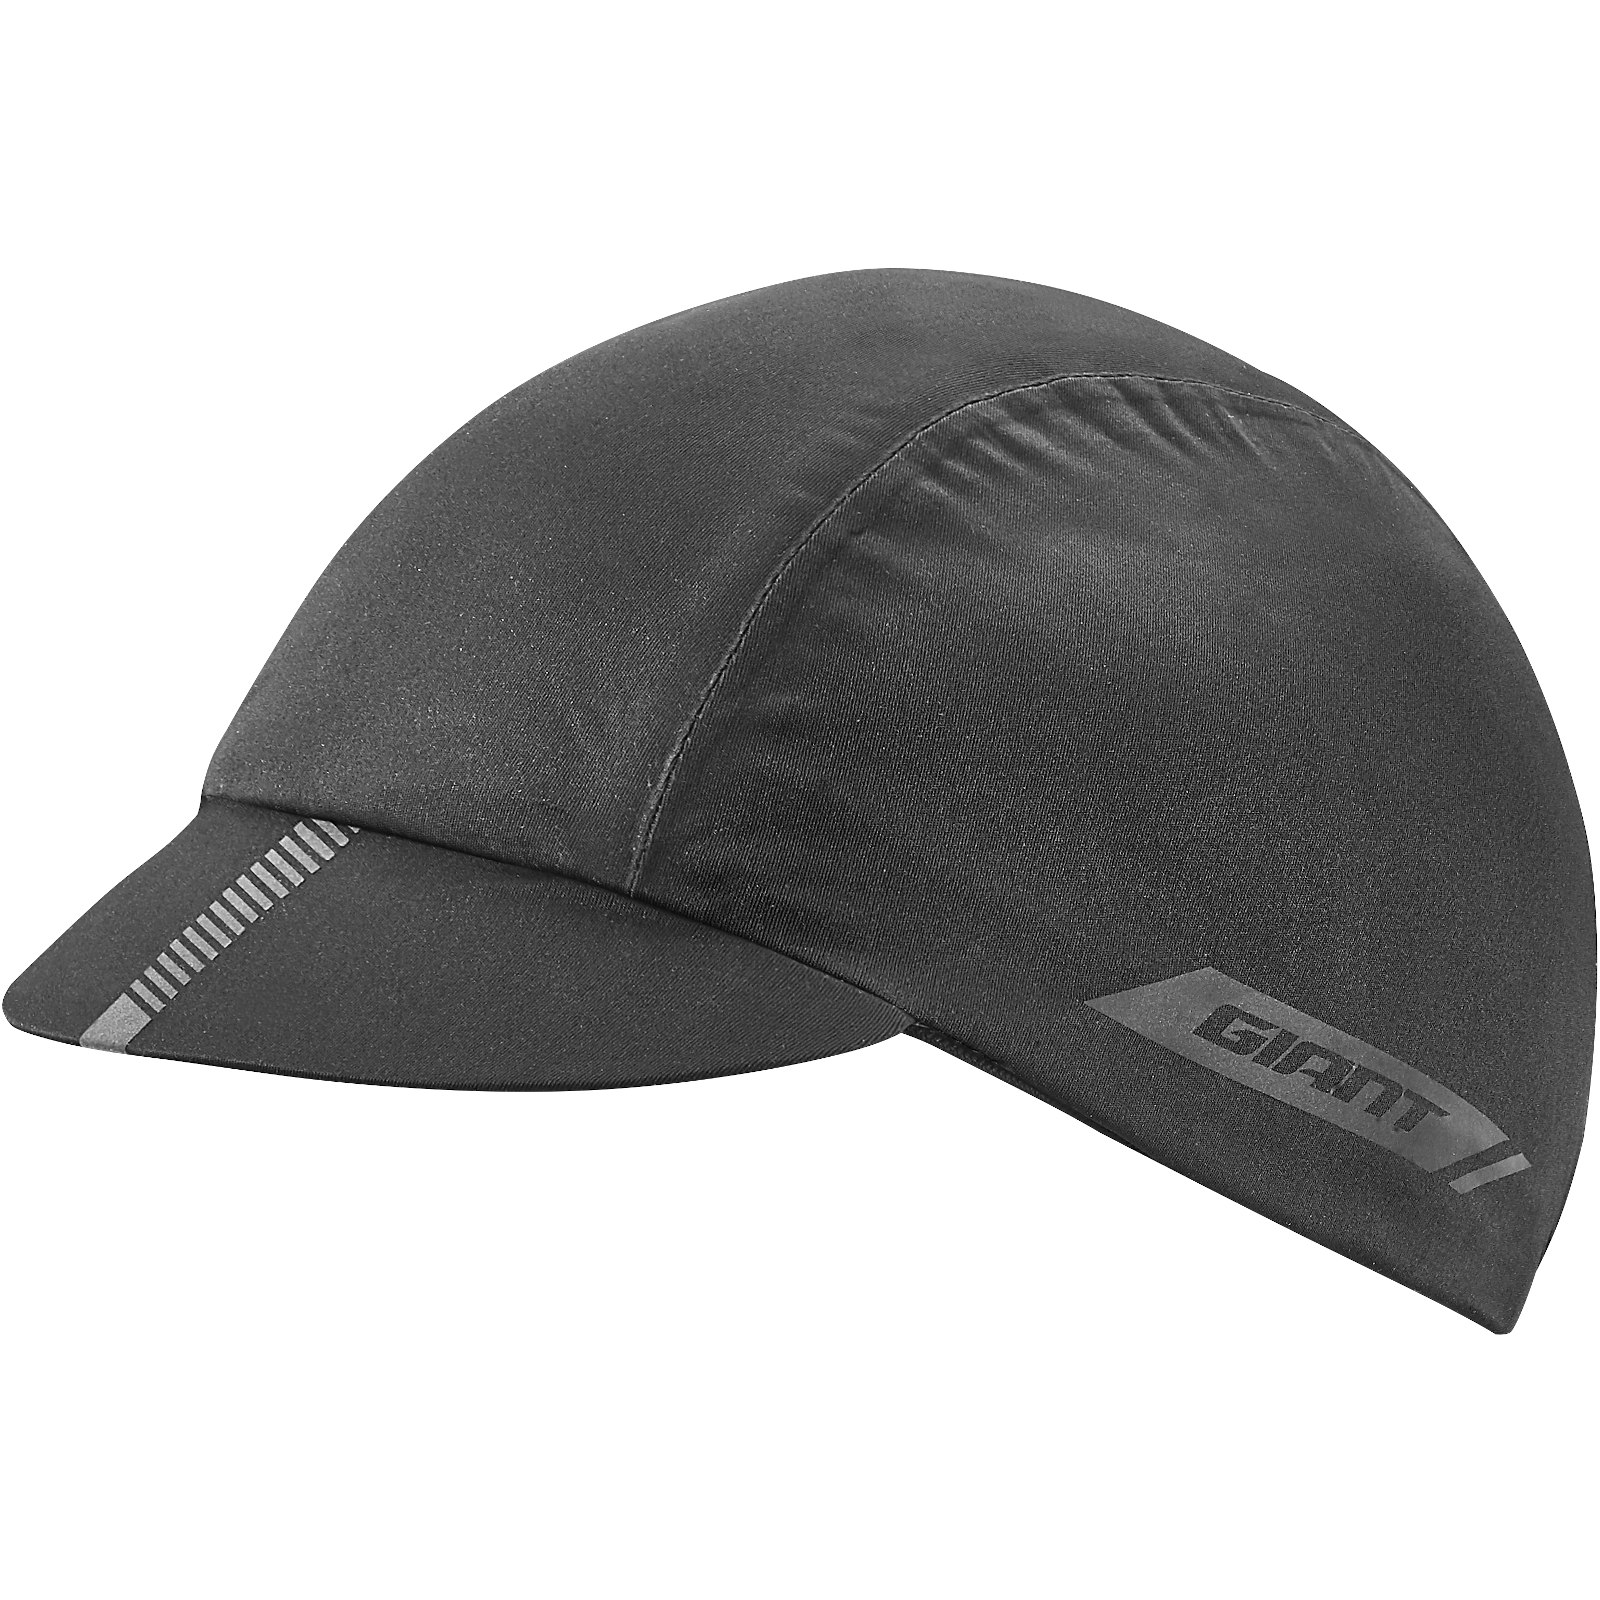 Picture of Giant Proshield Cycling Cap - black